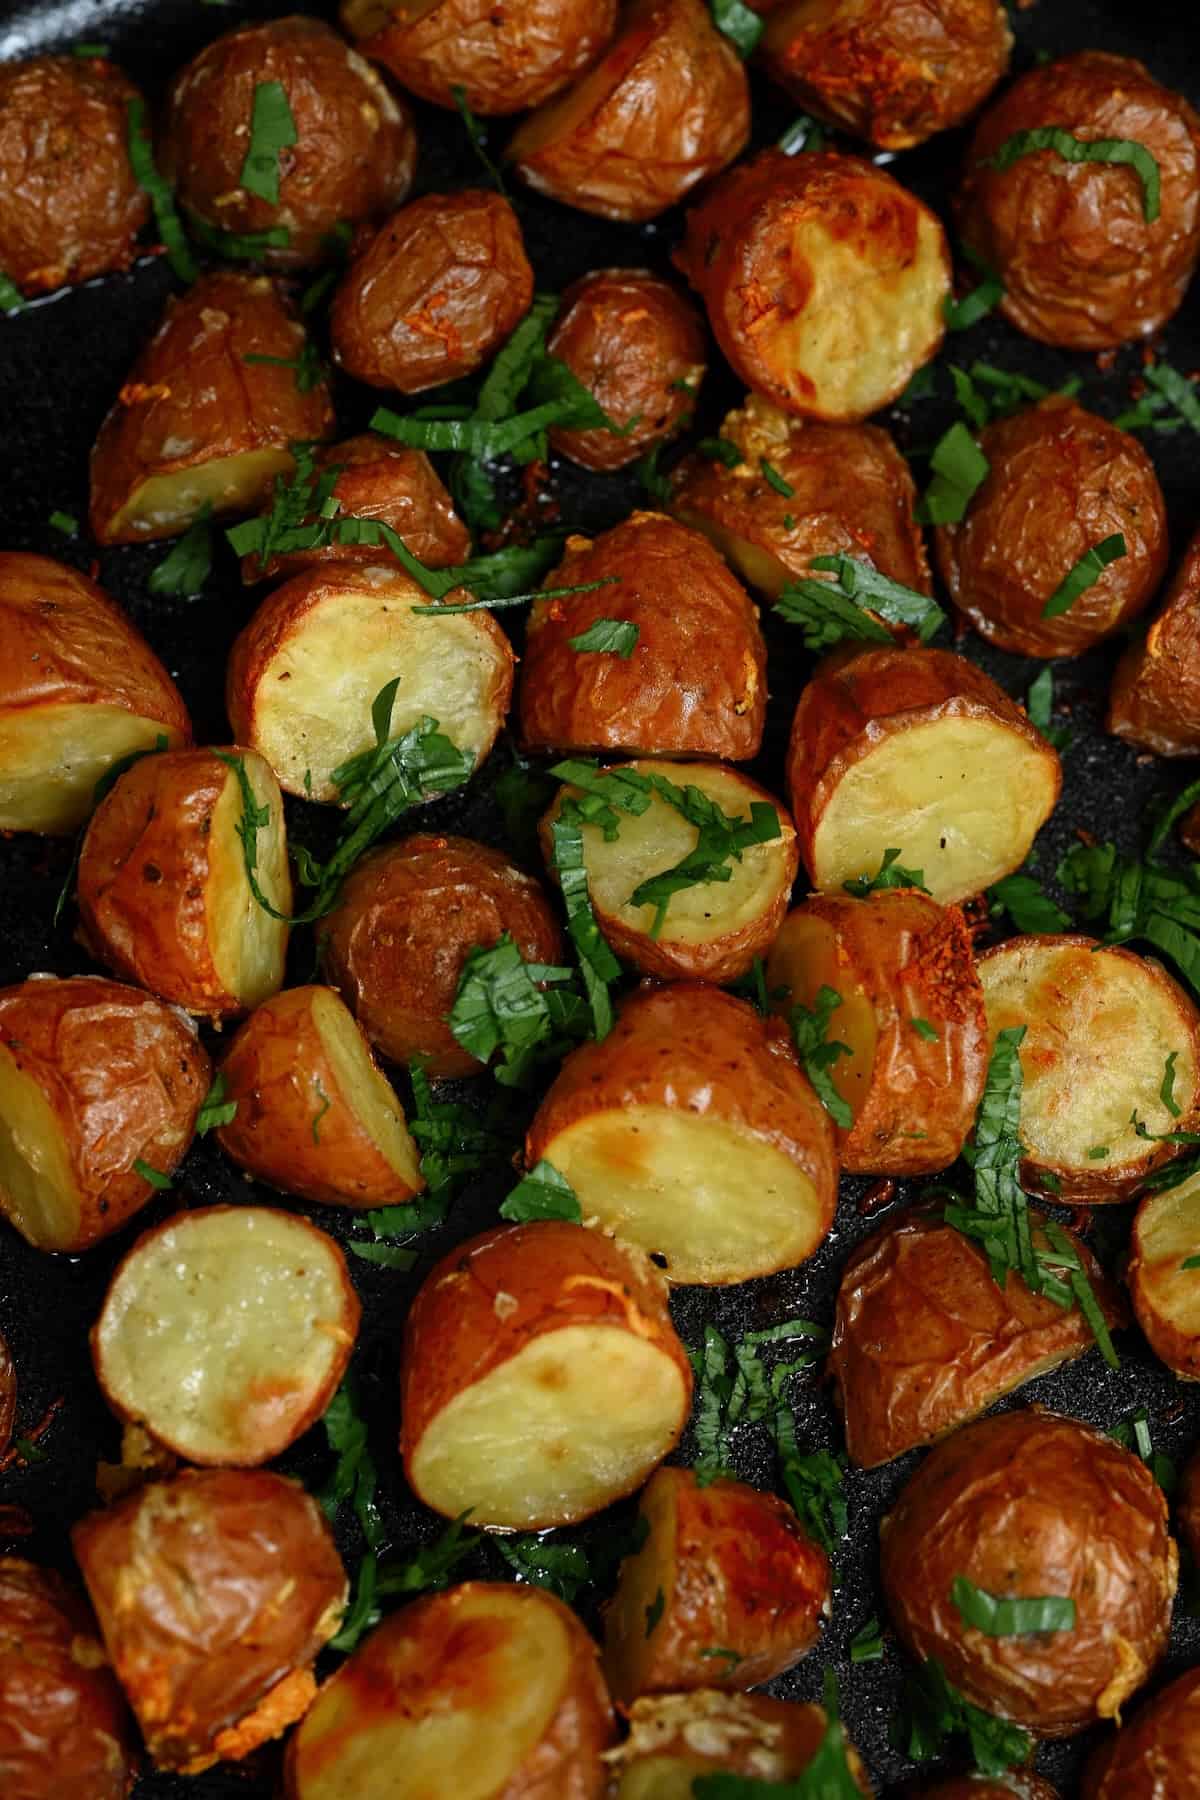 A close up of roasted new potatoes